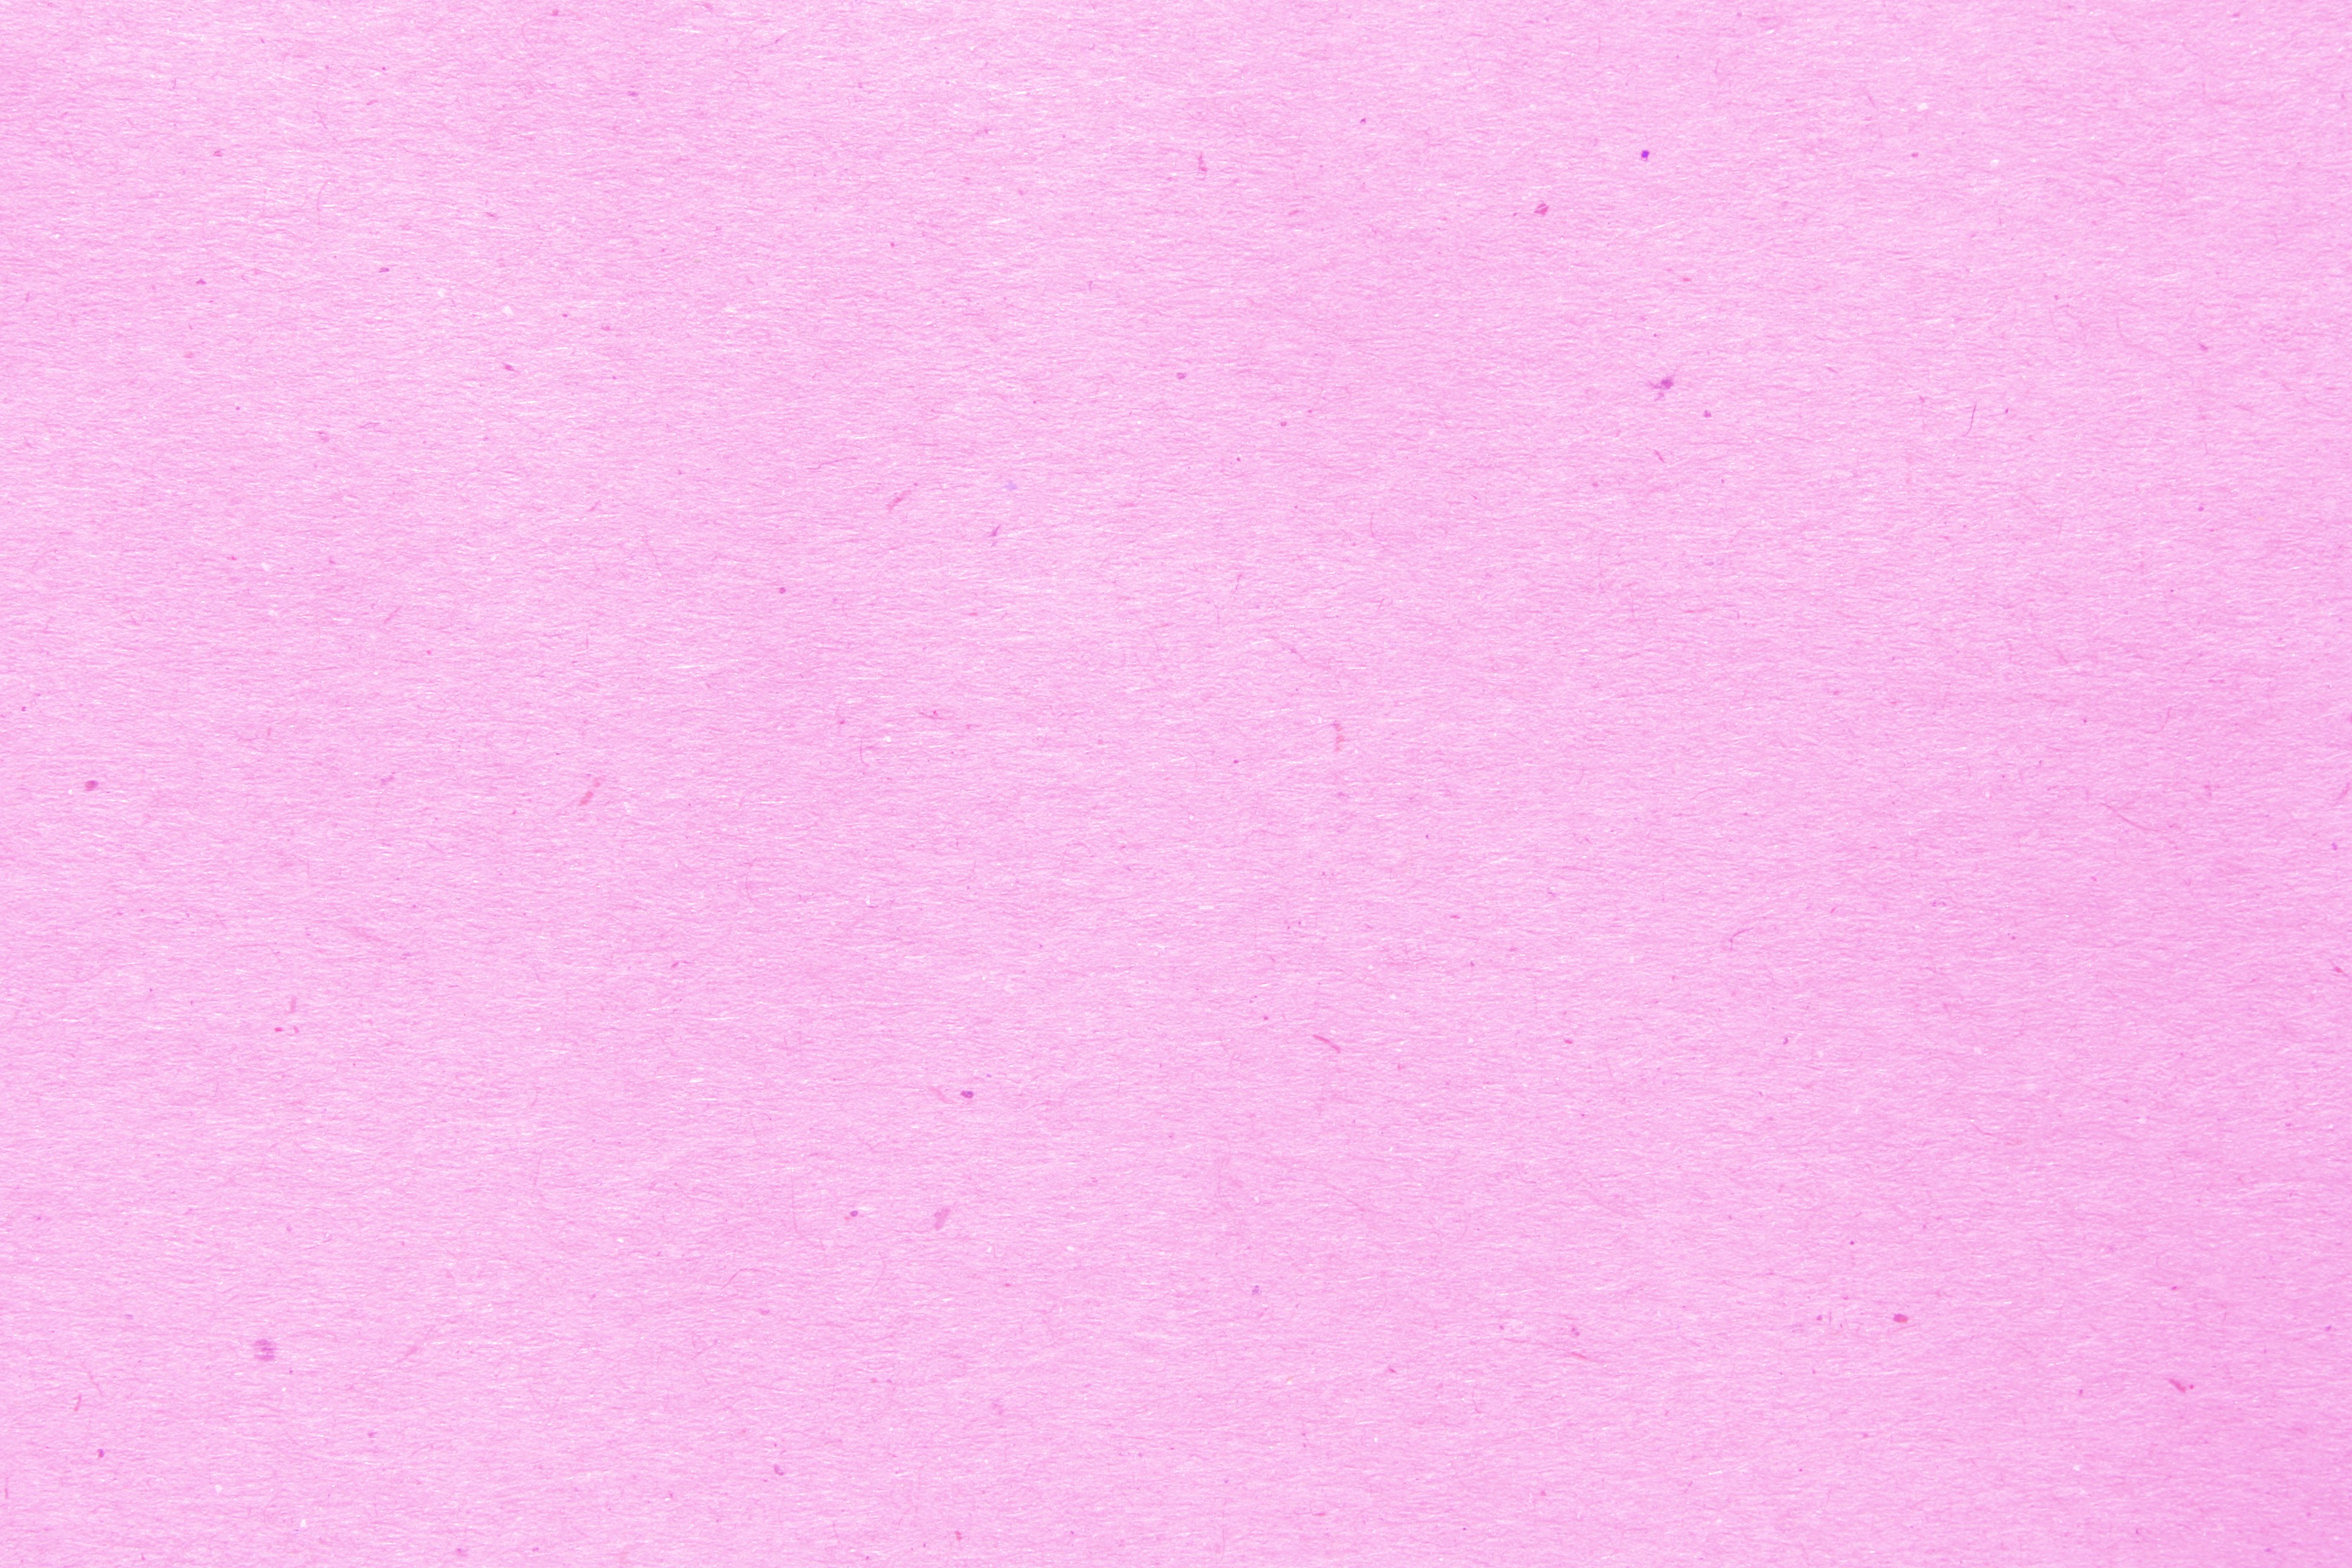 Pink paper photo